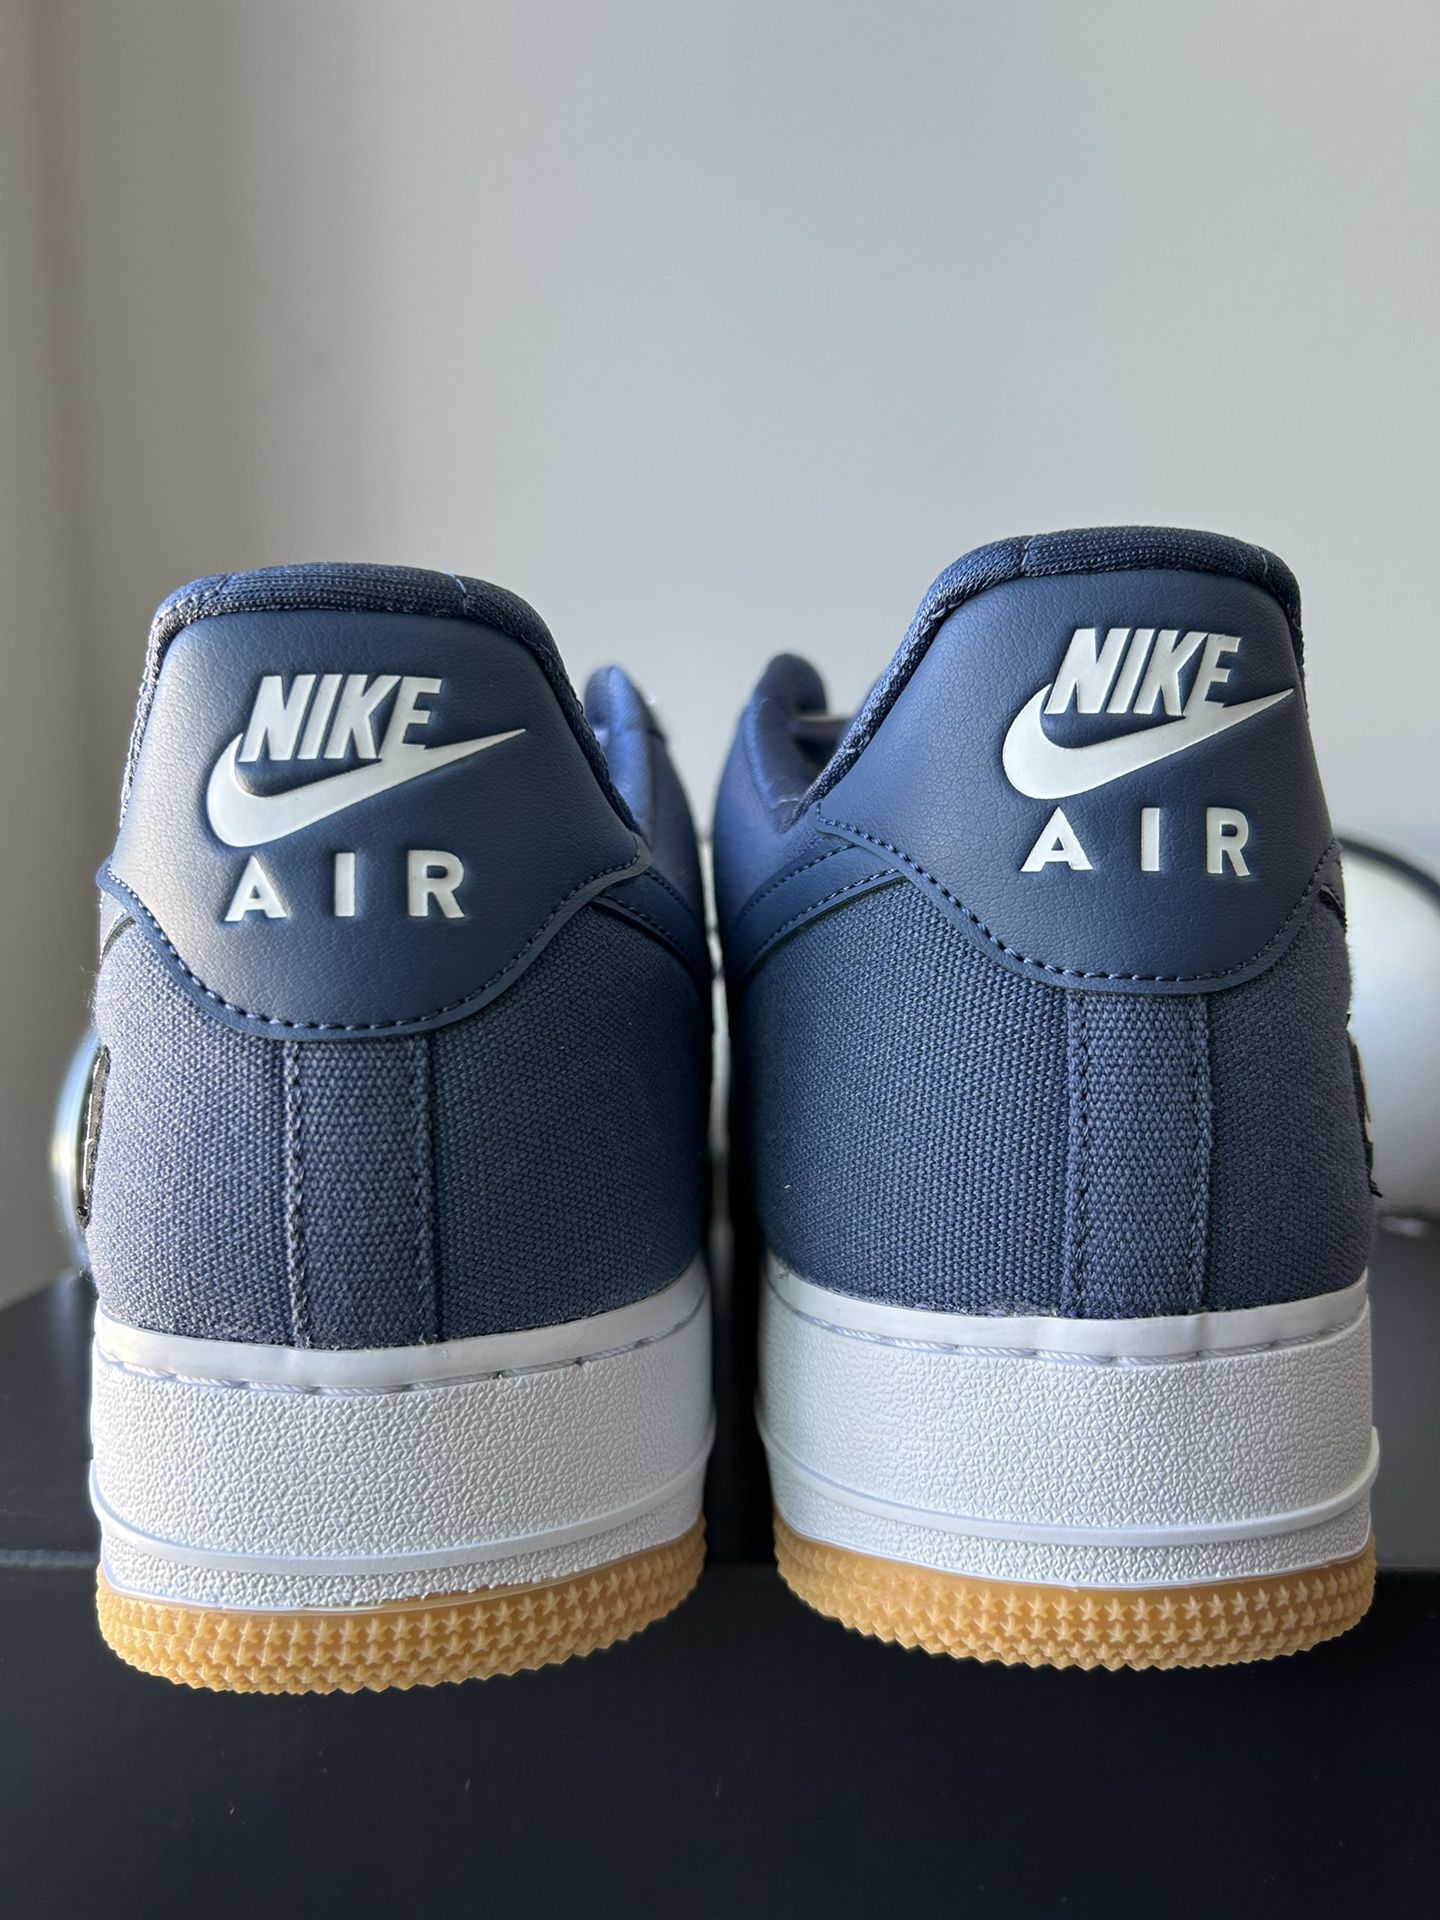 Off White Nike Air Force 1 “MOMA” size 11 for Sale in Los Angeles, CA -  OfferUp